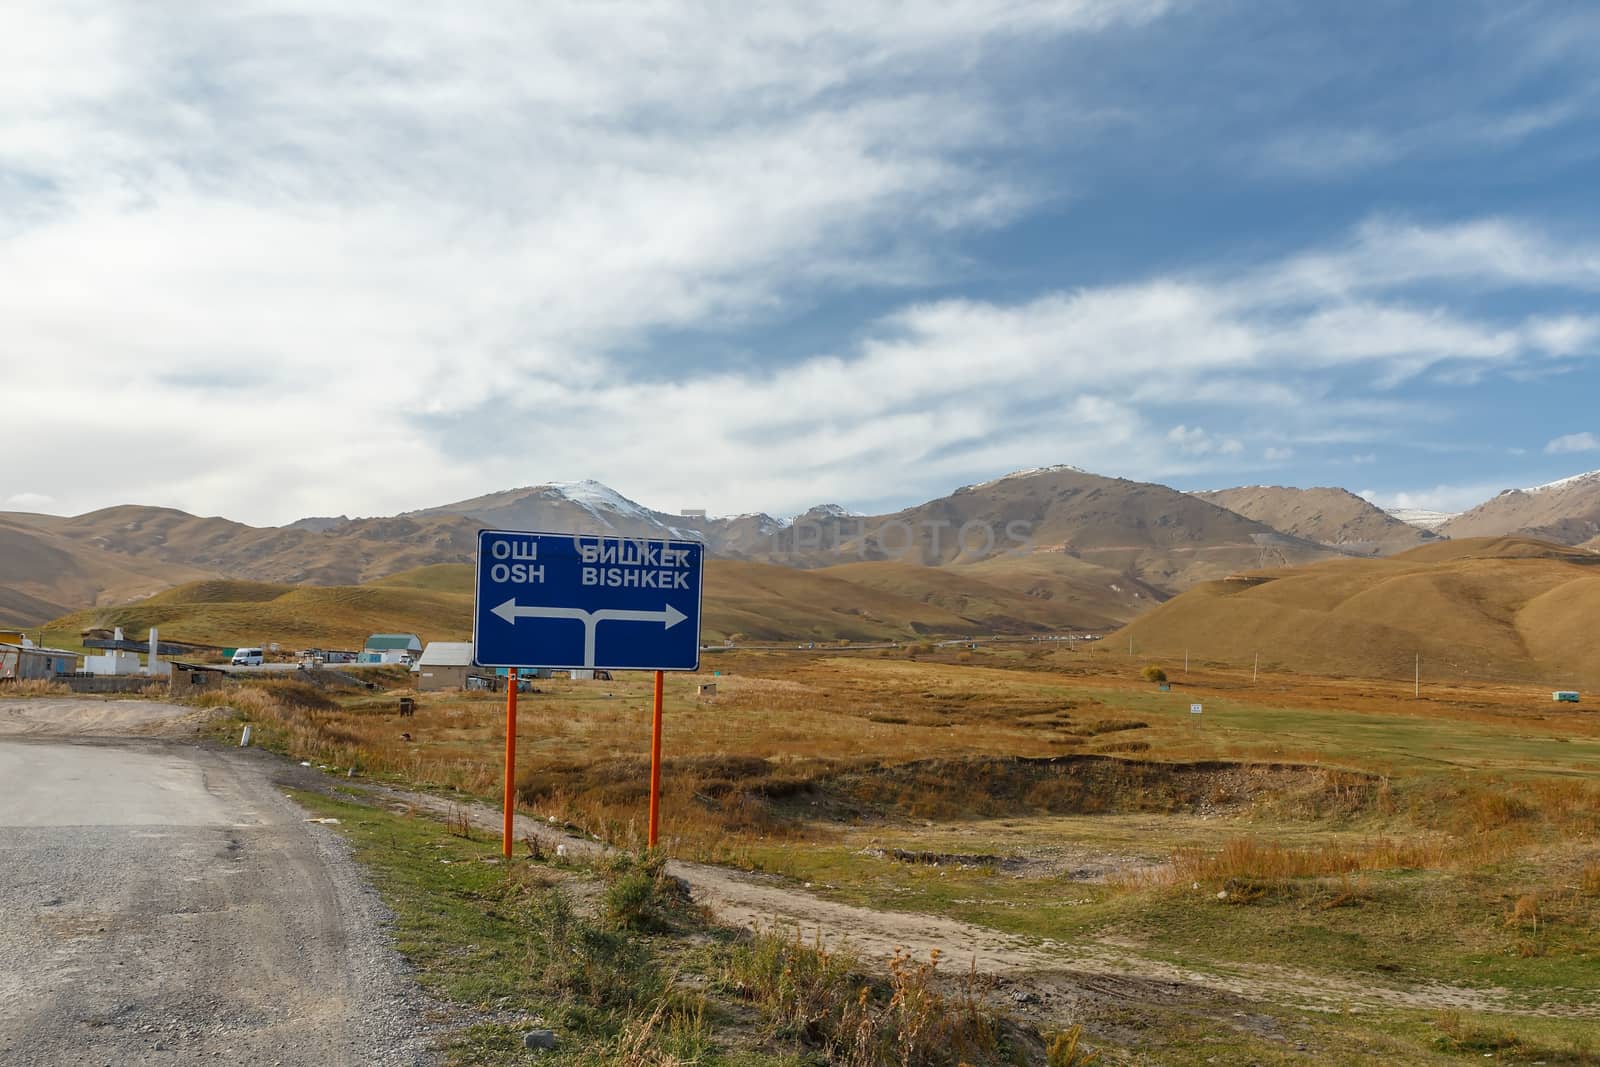 A traffic sign indicating the direction to Bishkek and Osh in the Suusamyr Valley in Kyrgyzstan.